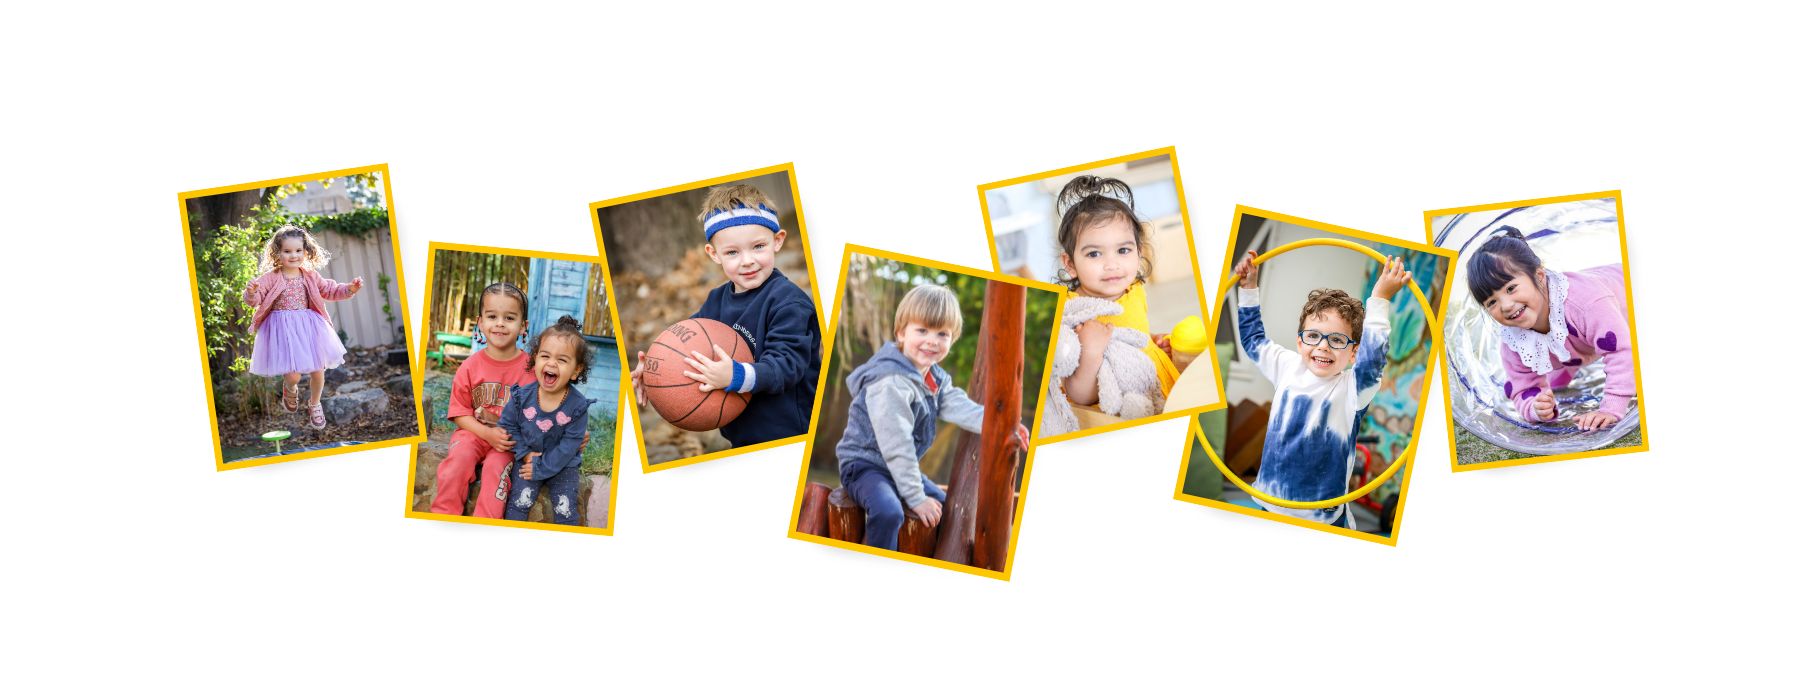 Gorgeous Images of Your Children at Kindergarten and Childcare